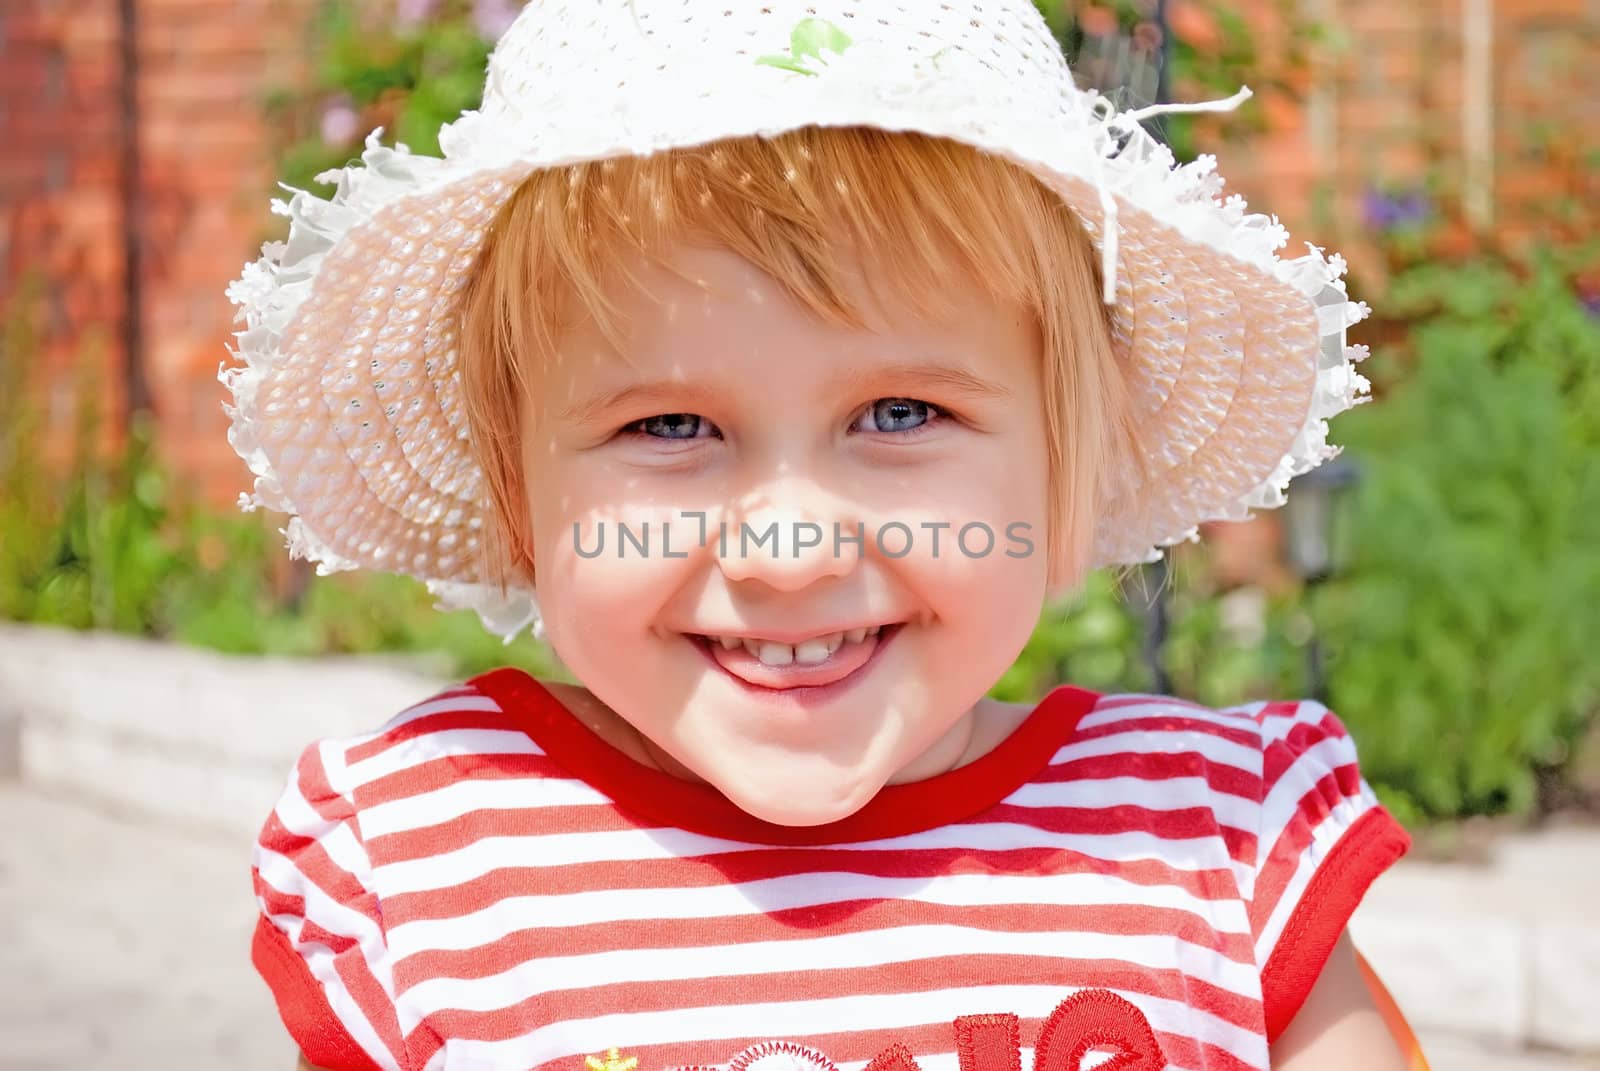 Portrait of a young girl in a white hat